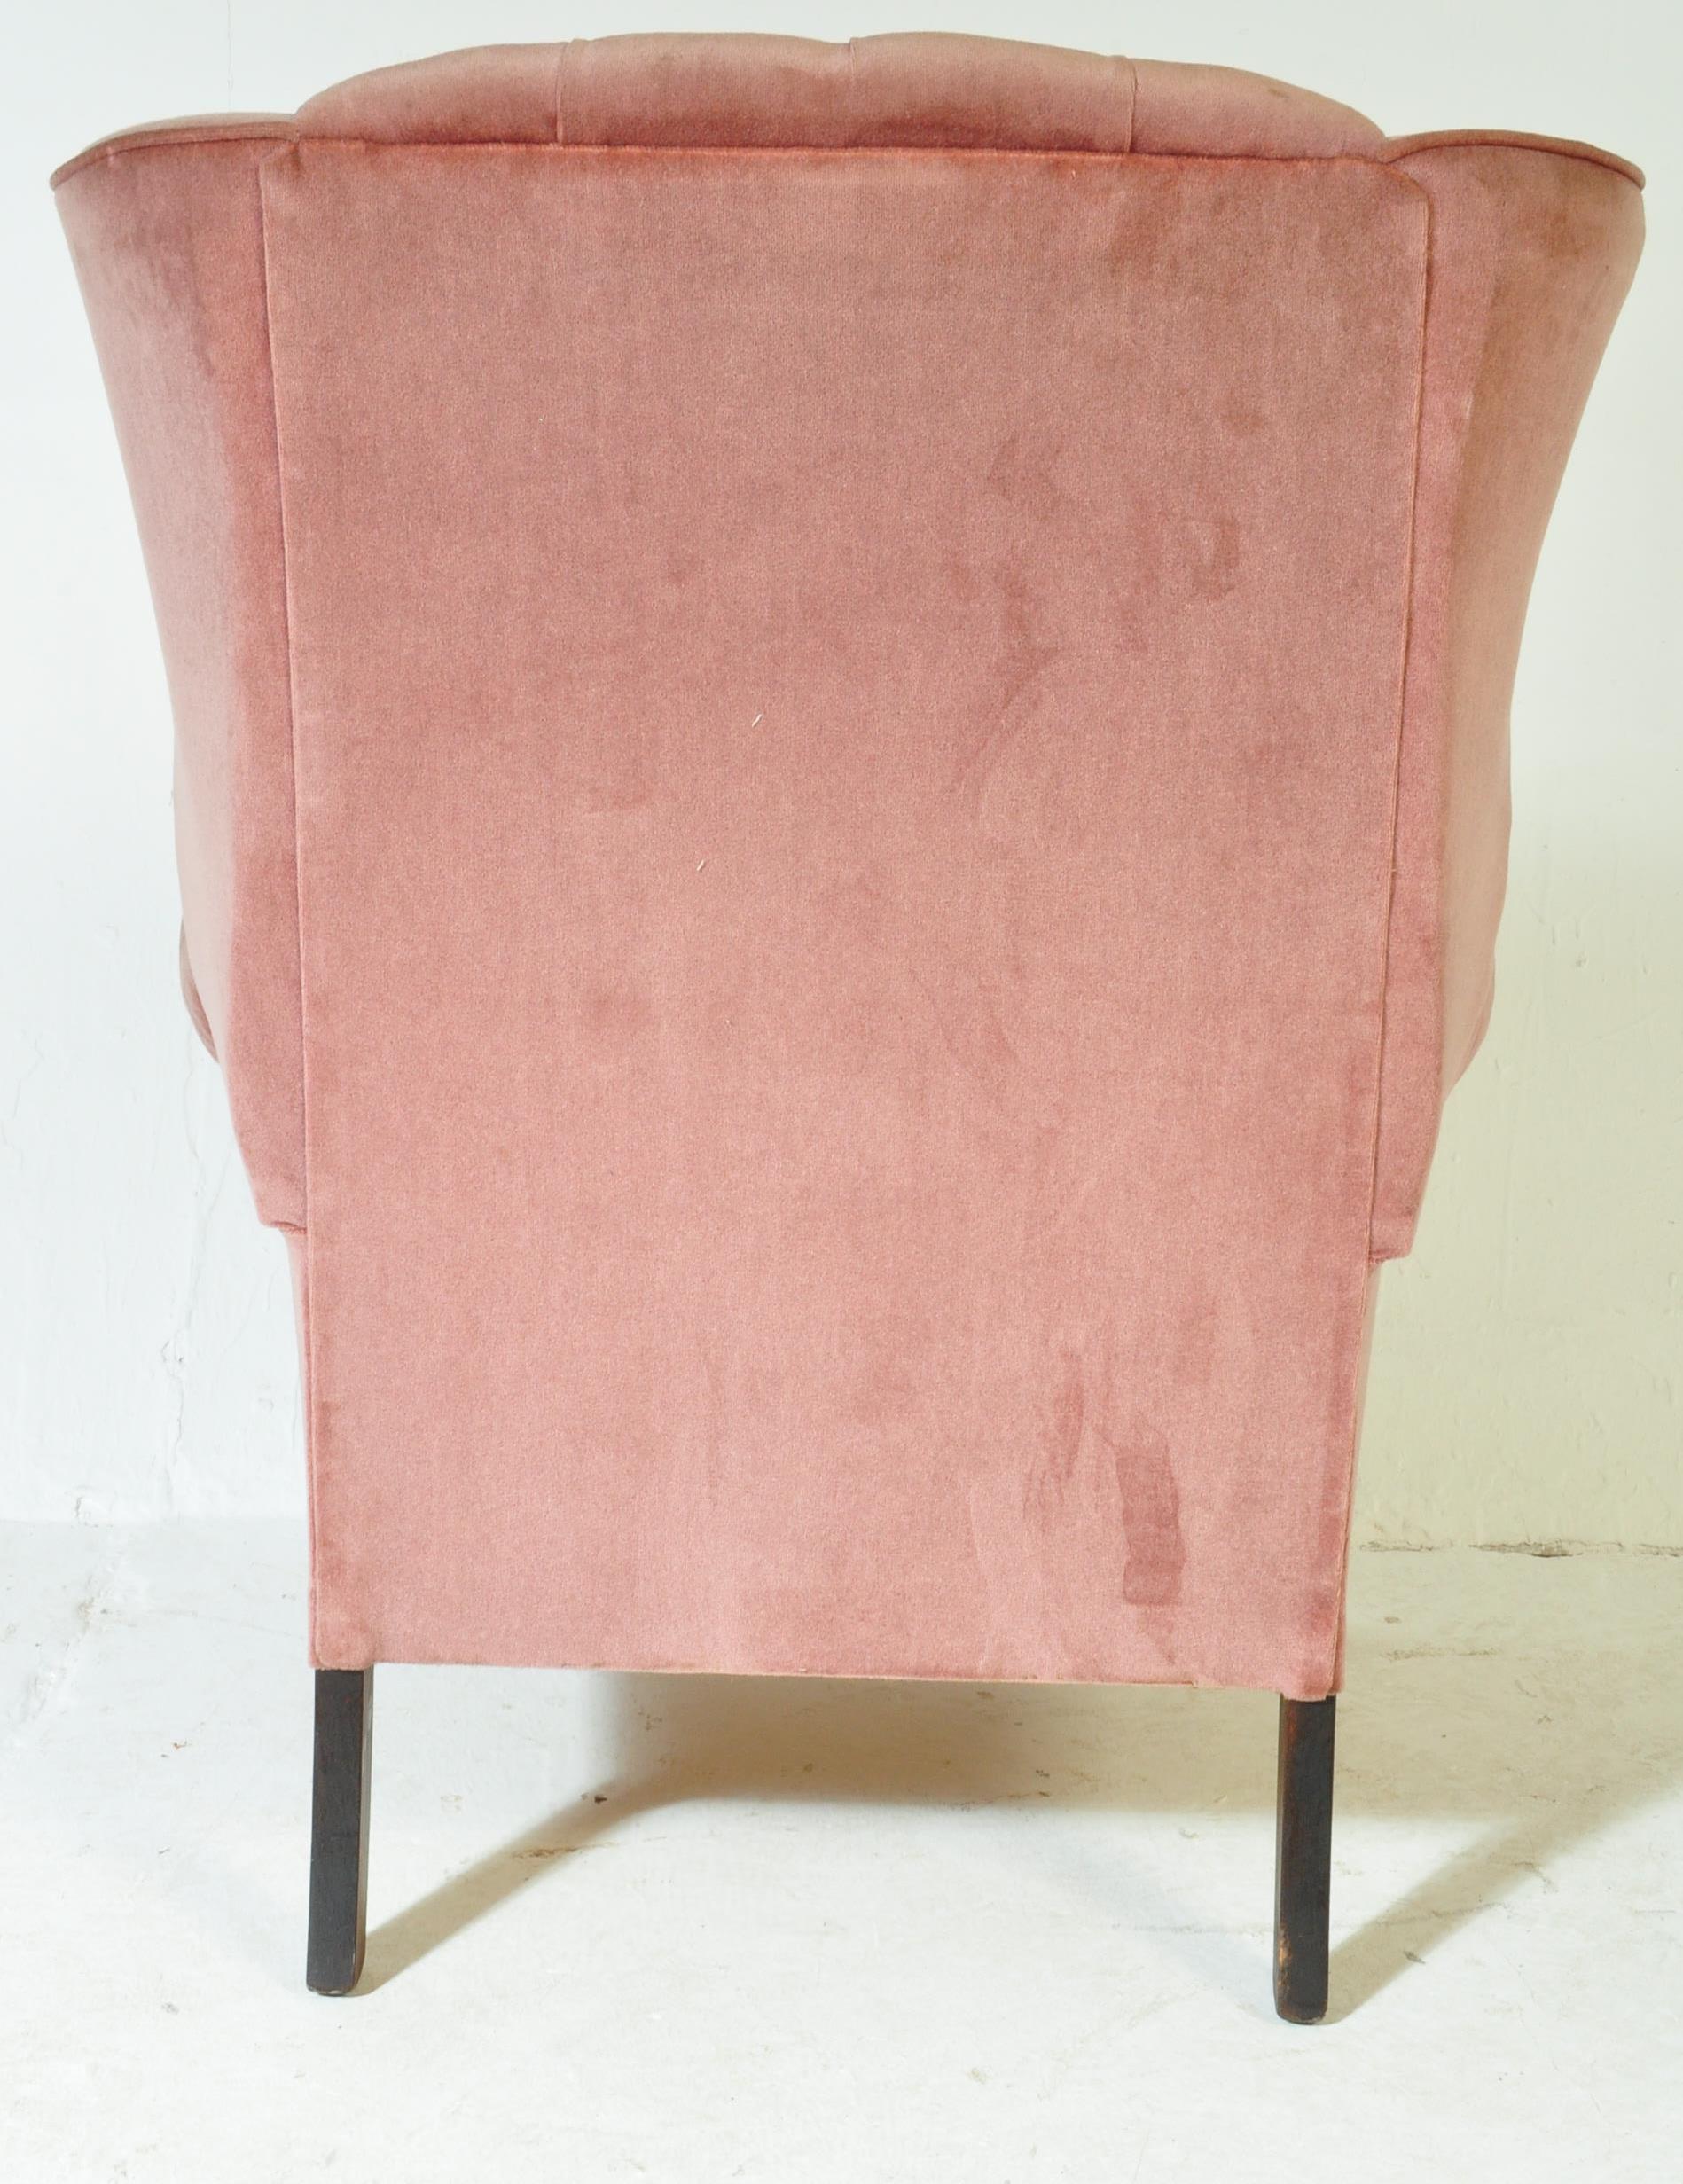 VINTAGE MID 20TH CENTURY PINK UPHOLSTERED WINGBACK ARMCHAIR - Image 5 of 5